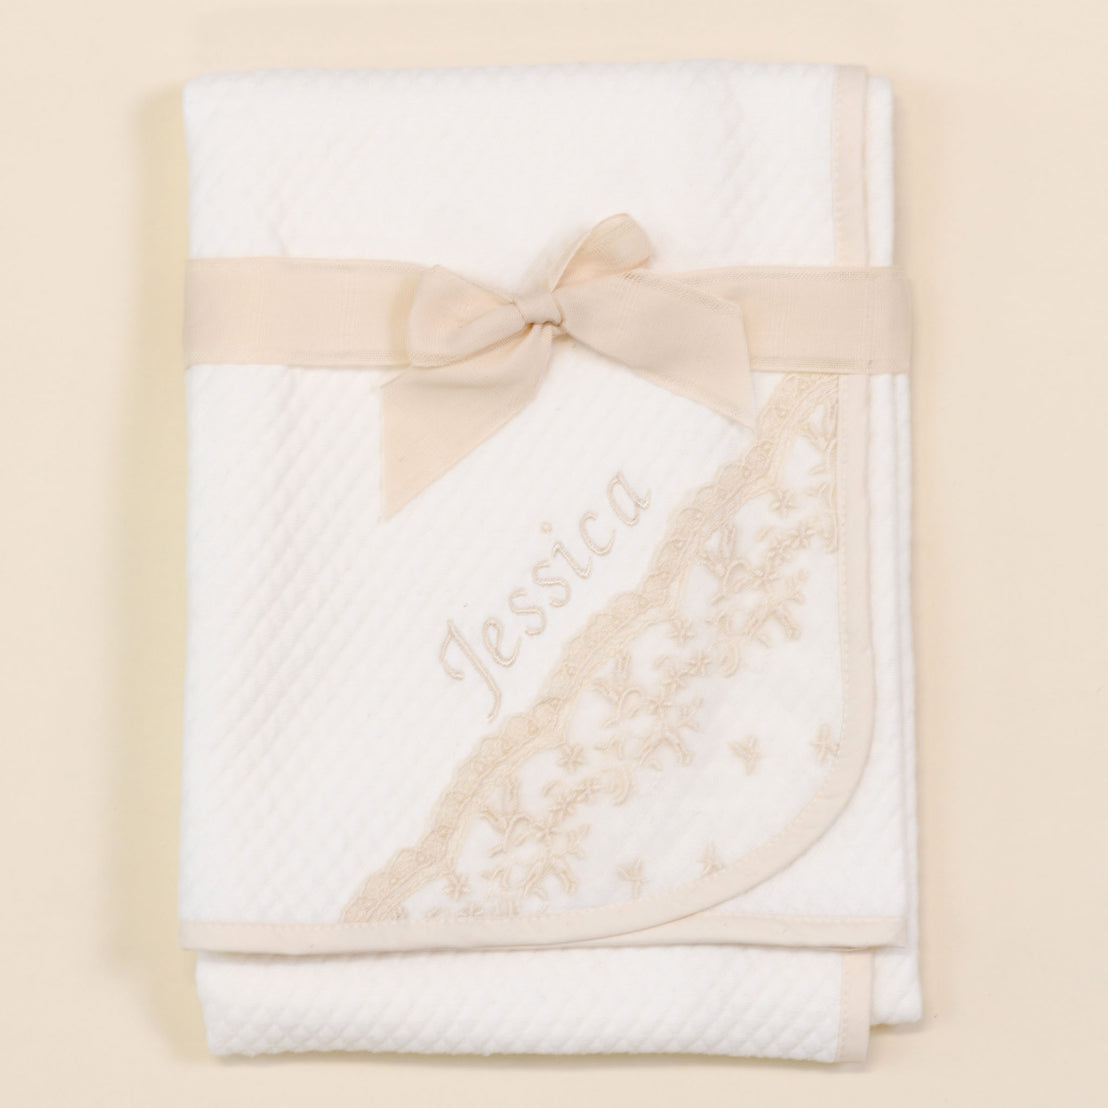 The Jessica Personalized Blanket with "Jessica" embroidered in champagne, adorned with matching lace trim on the corner. A champagne satin ribbon tied in a bow secures the blanket set against a beige background.